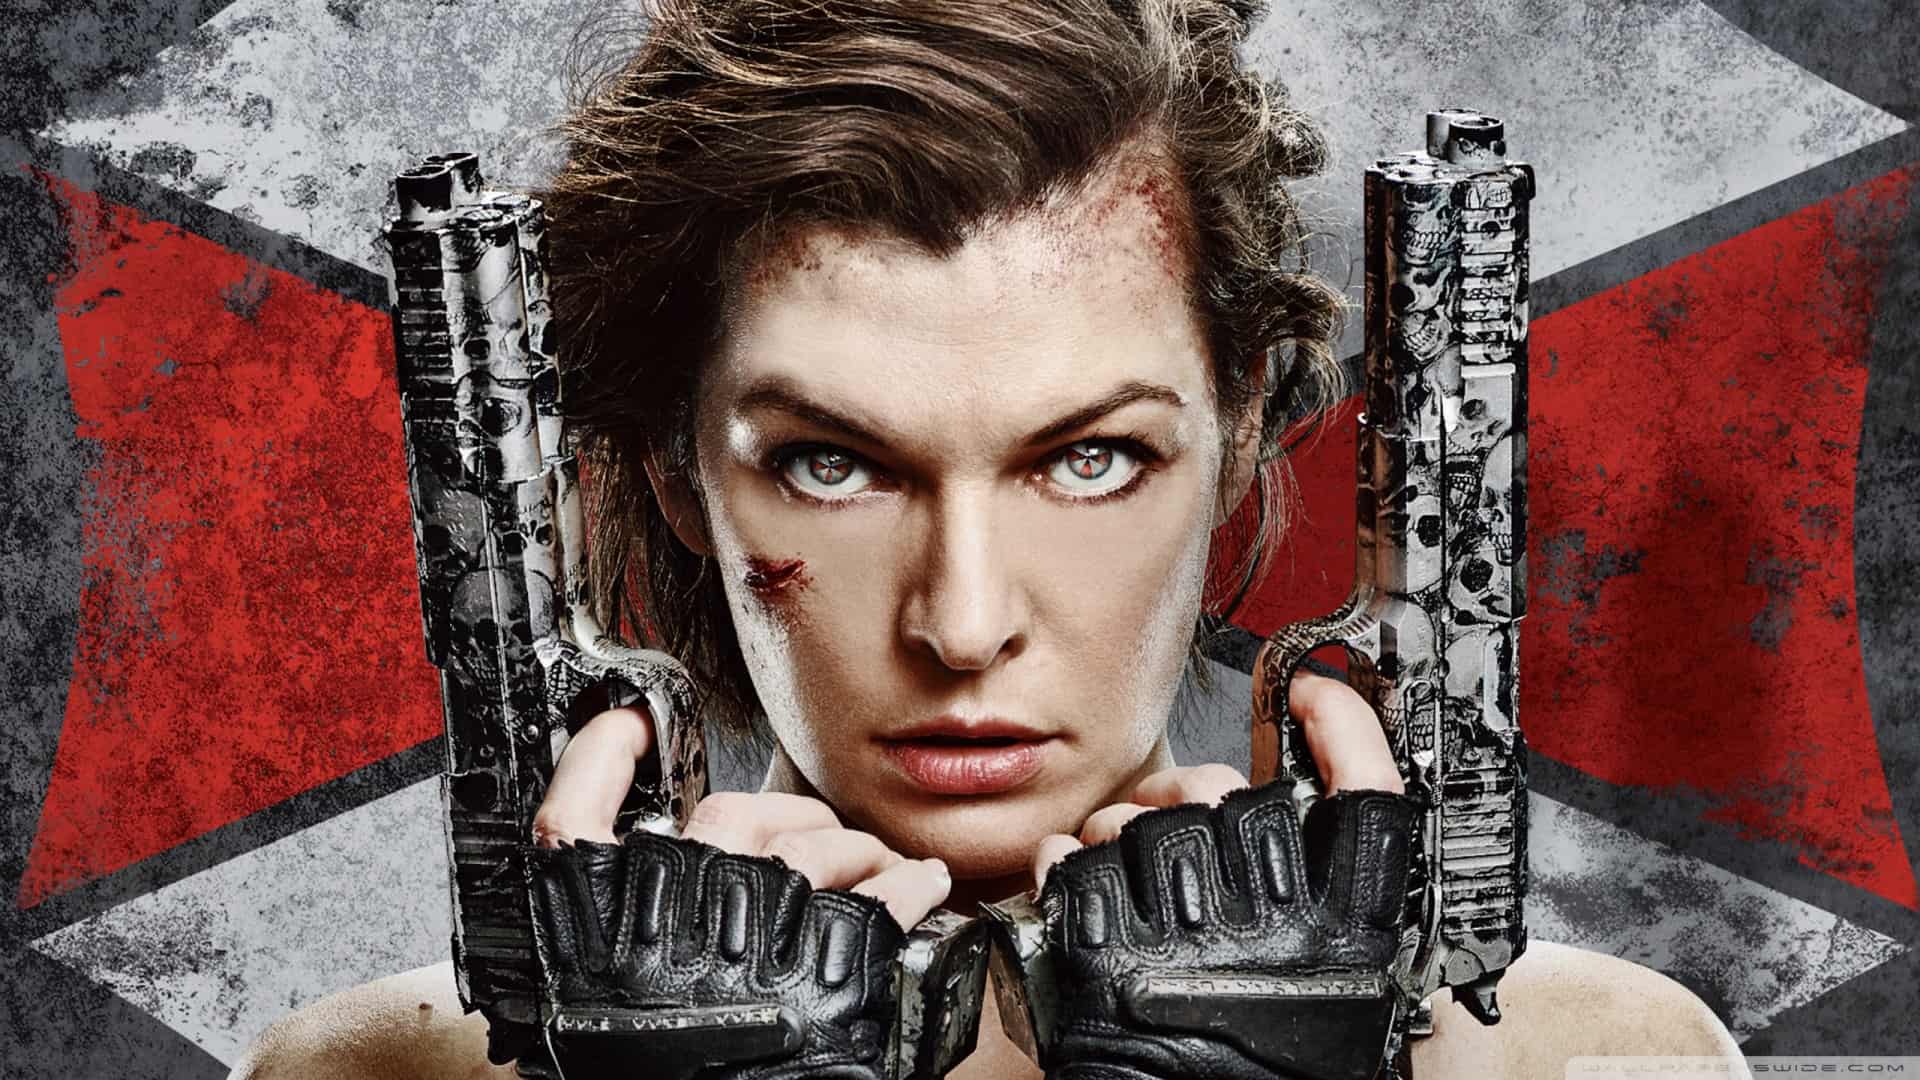 Every Resident Evil Movie & Series Ranked from Worst to Best